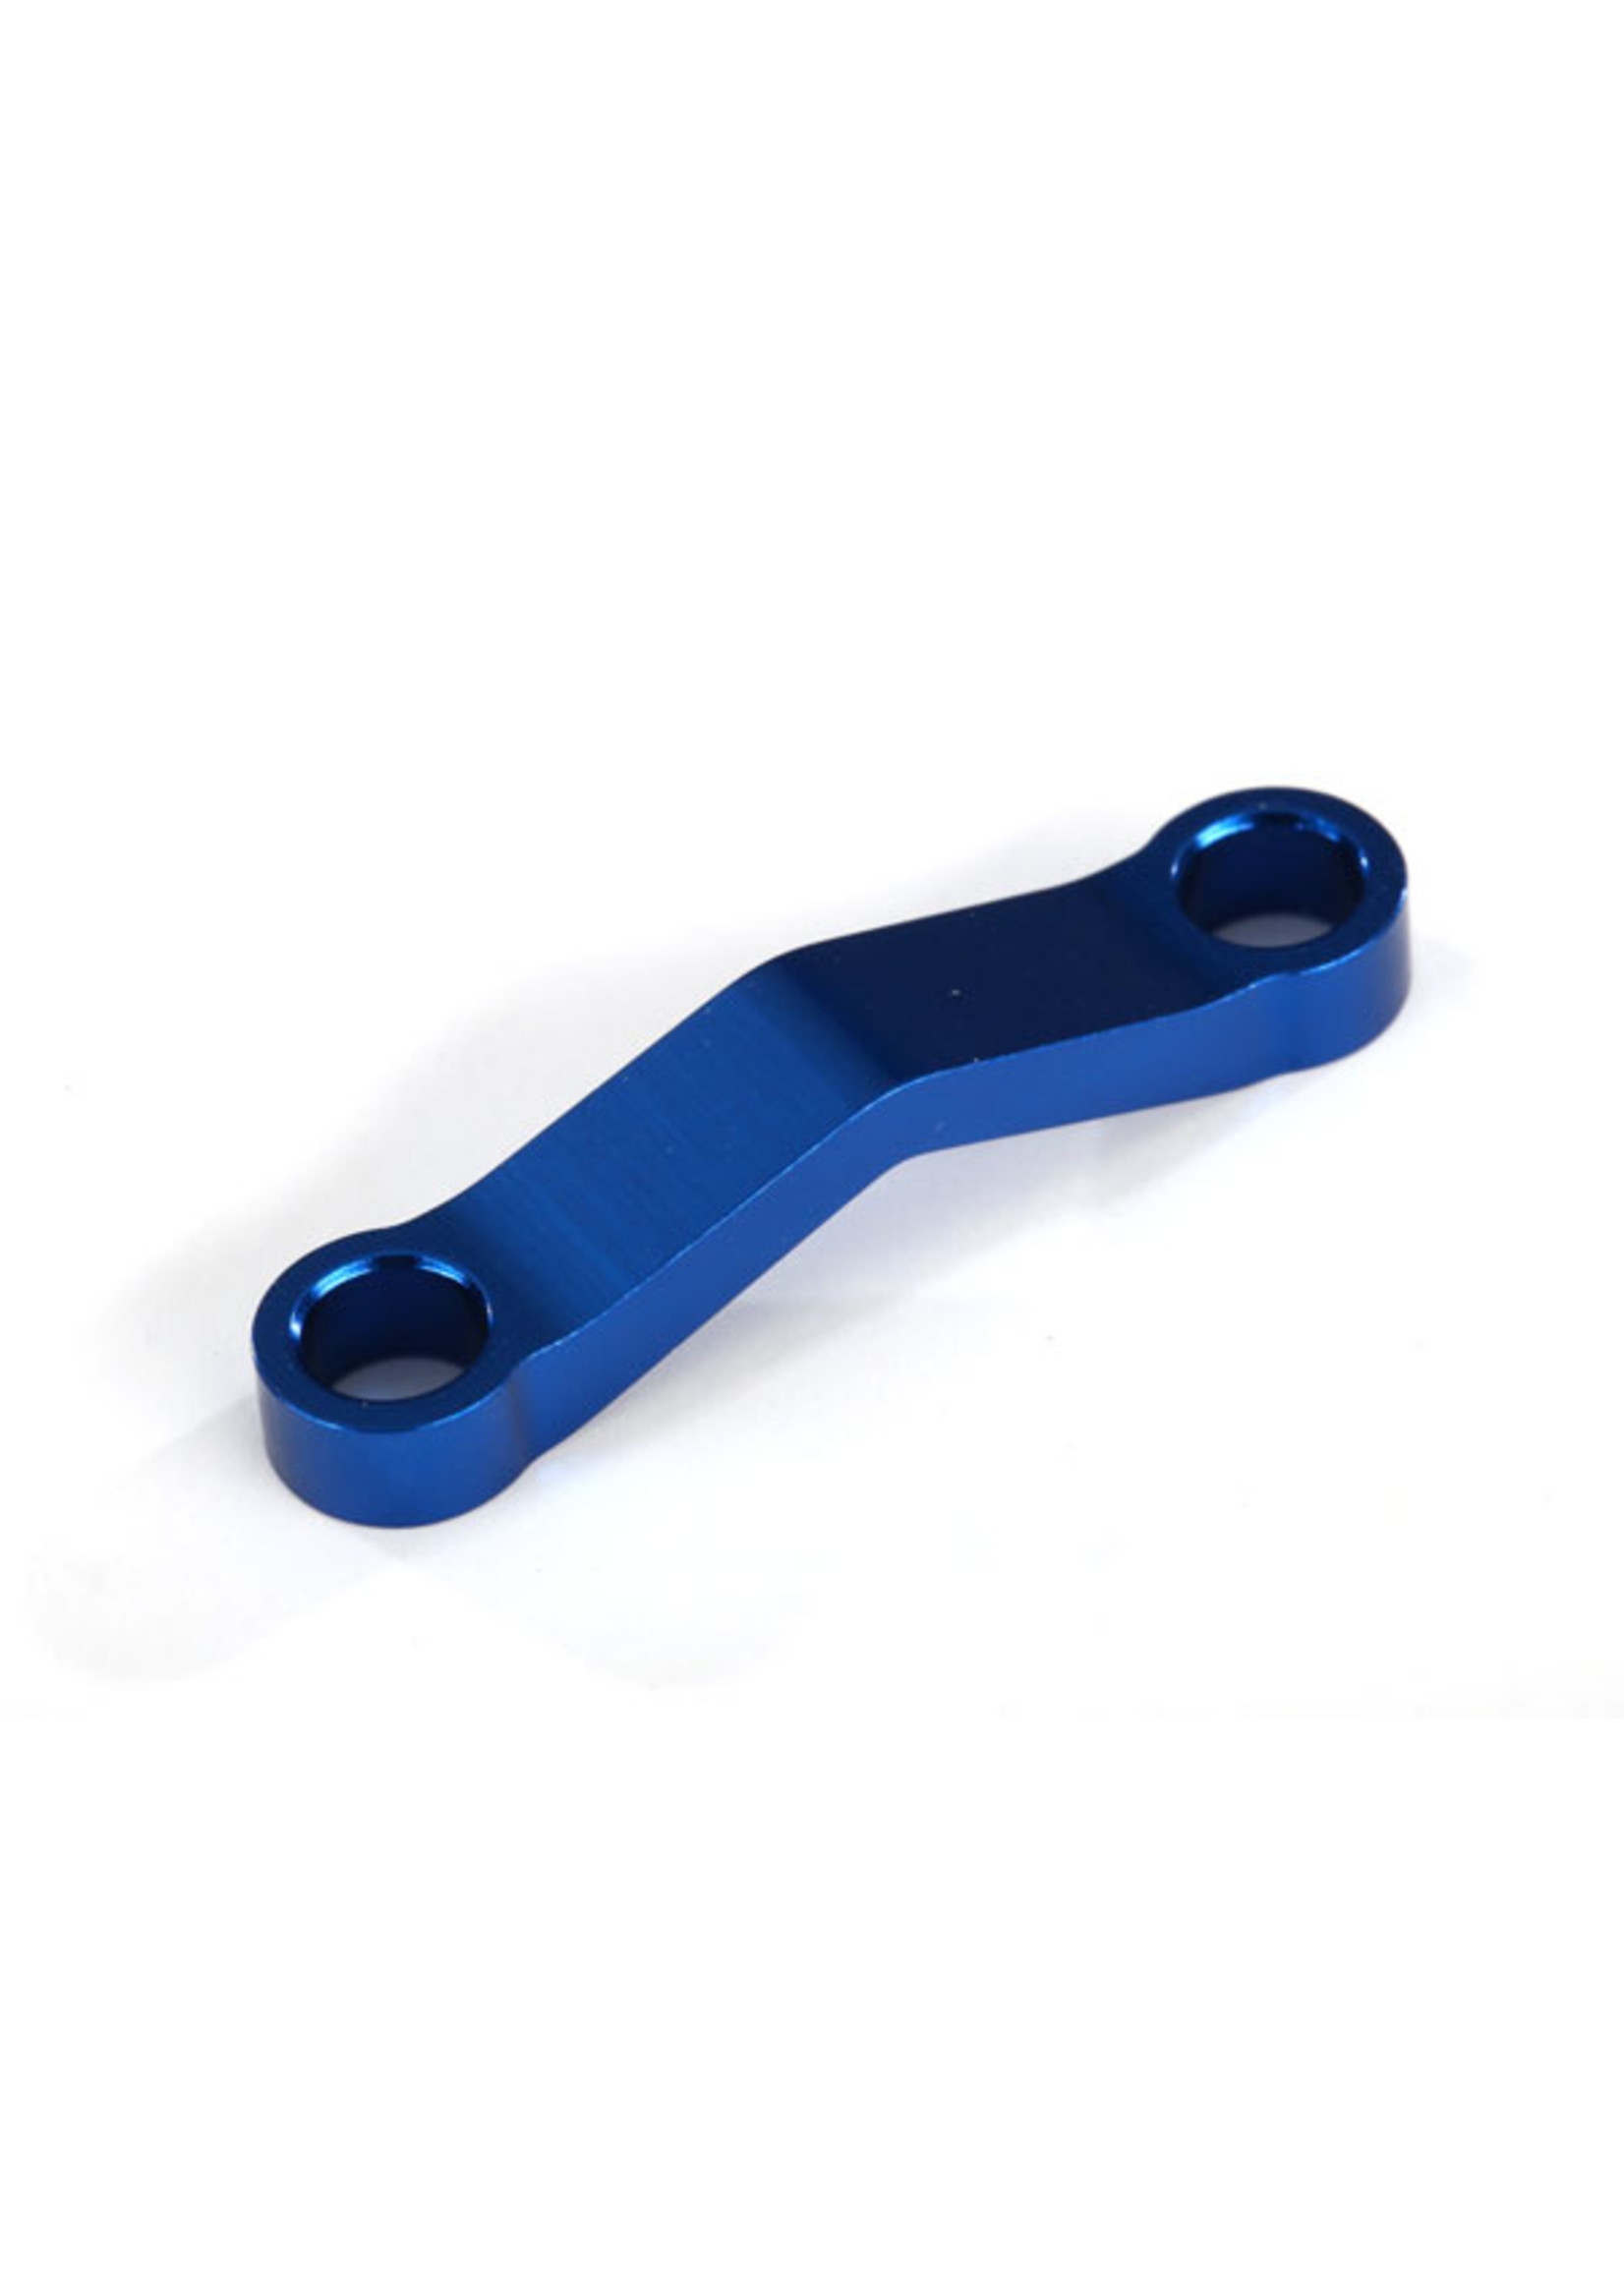 Traxxas 6845A - Drag Link, Machined - Blue